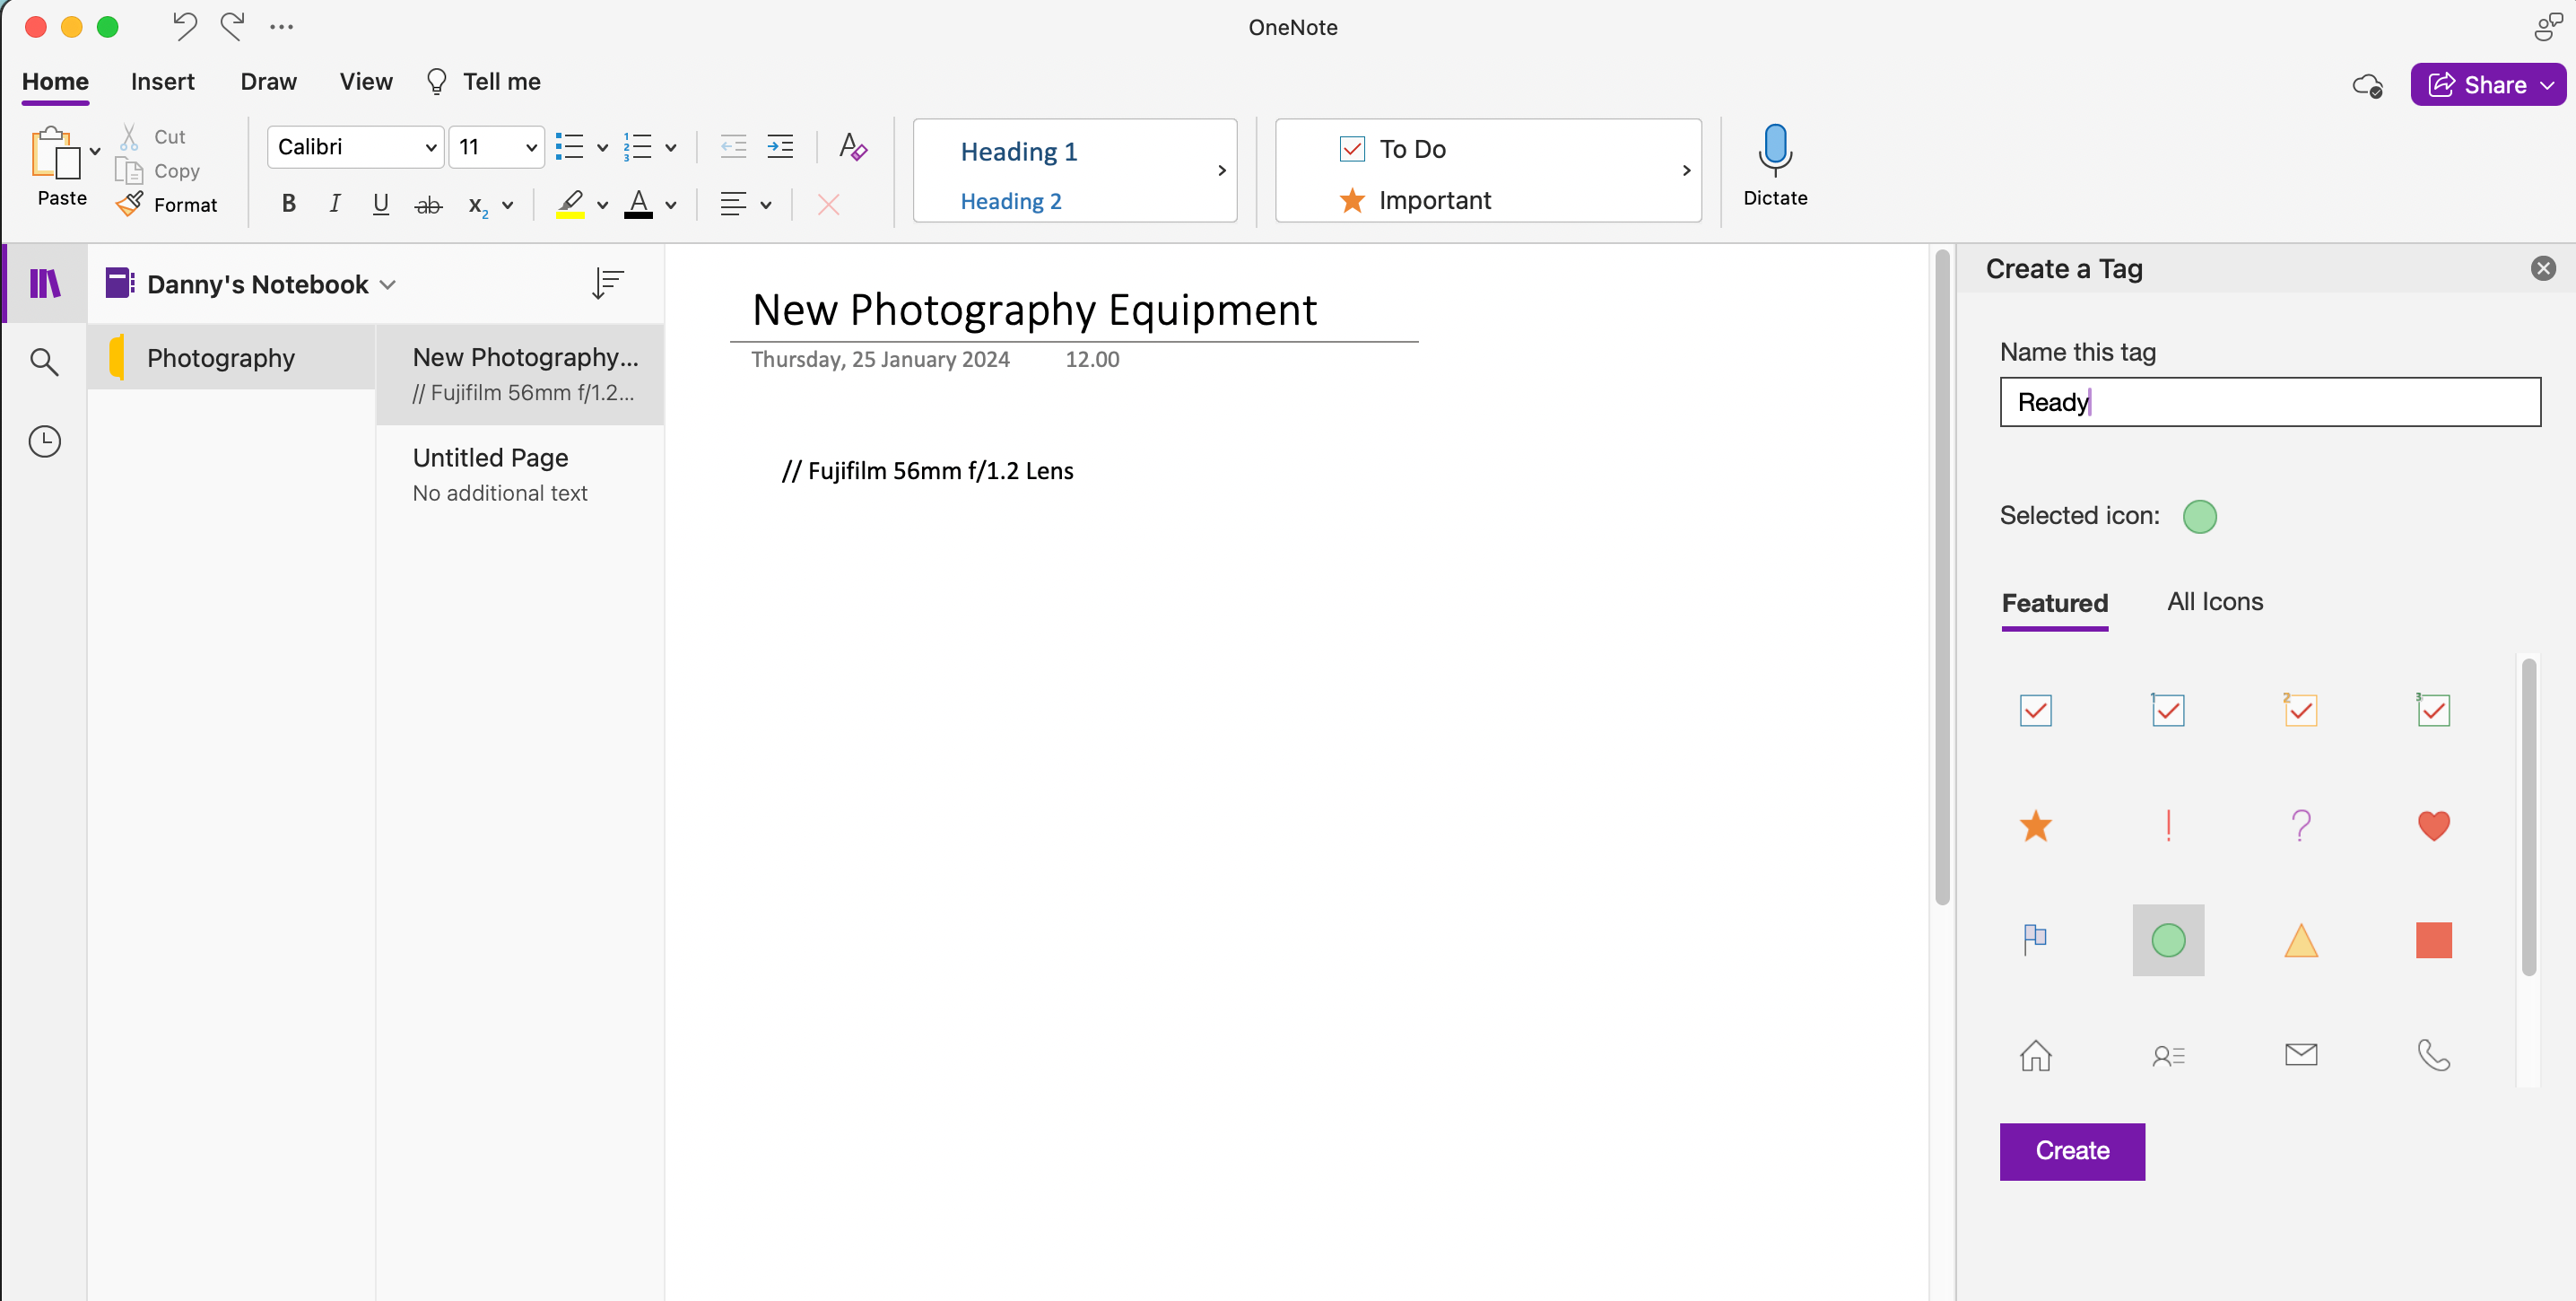 Customize the new tag that you want to create in OneNote